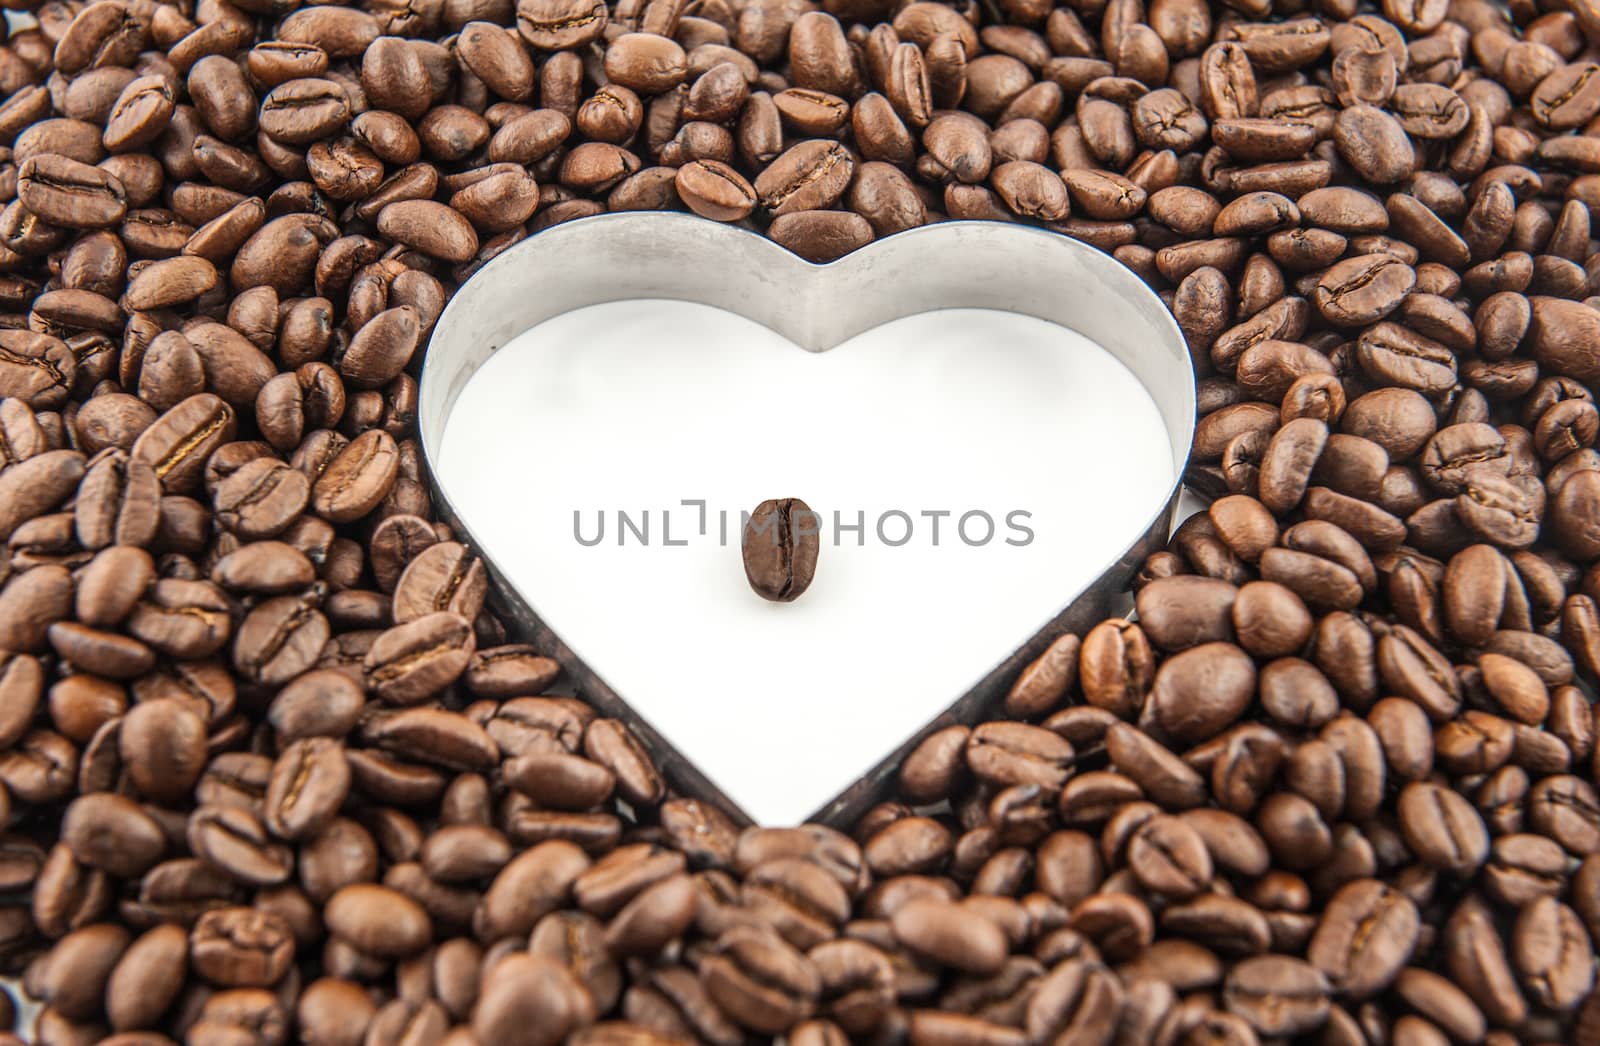 Coffee beans in the white heart surrounded by coffee beans.